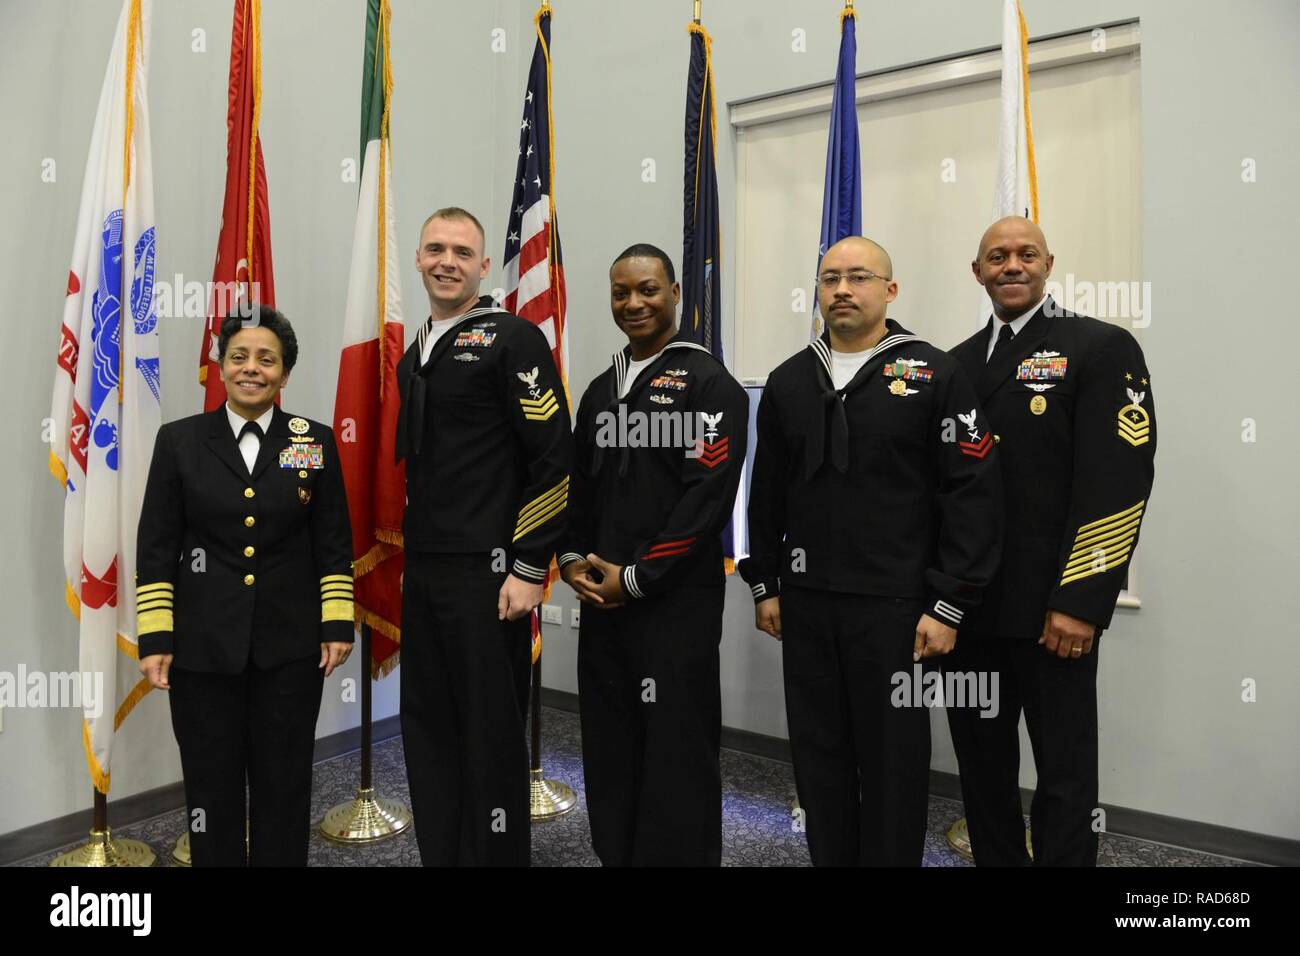 NAVAL SUPPORT ACTIVITY NAPLES, Italy (Jan. 27, 2017) From left to right: Commander, U.S. Naval Forces Europe-Africa, Adm. Michelle Howard; U.S. Naval Forces Europe-Africa Sea Sailor of the Year, Intelligence Specialist 1st Class Kevin Pulley; U.S. Naval Forces Europe-Africa Shore Sailor of the Year, Hospital Corpsman 1st Class Kenneth Terrell; U.S. Naval Forces Europe-Africa Junior Sailor of the Year Yeoman 2nd Class Eric Horne and U.S. Naval Forces Europe-Africa Fleet Master Chief Raymond D. Kemp Sr. pose for a photo at the Commander, U.S. Naval Forces Europe-Africa Sailor of the year ceremon Stock Photo